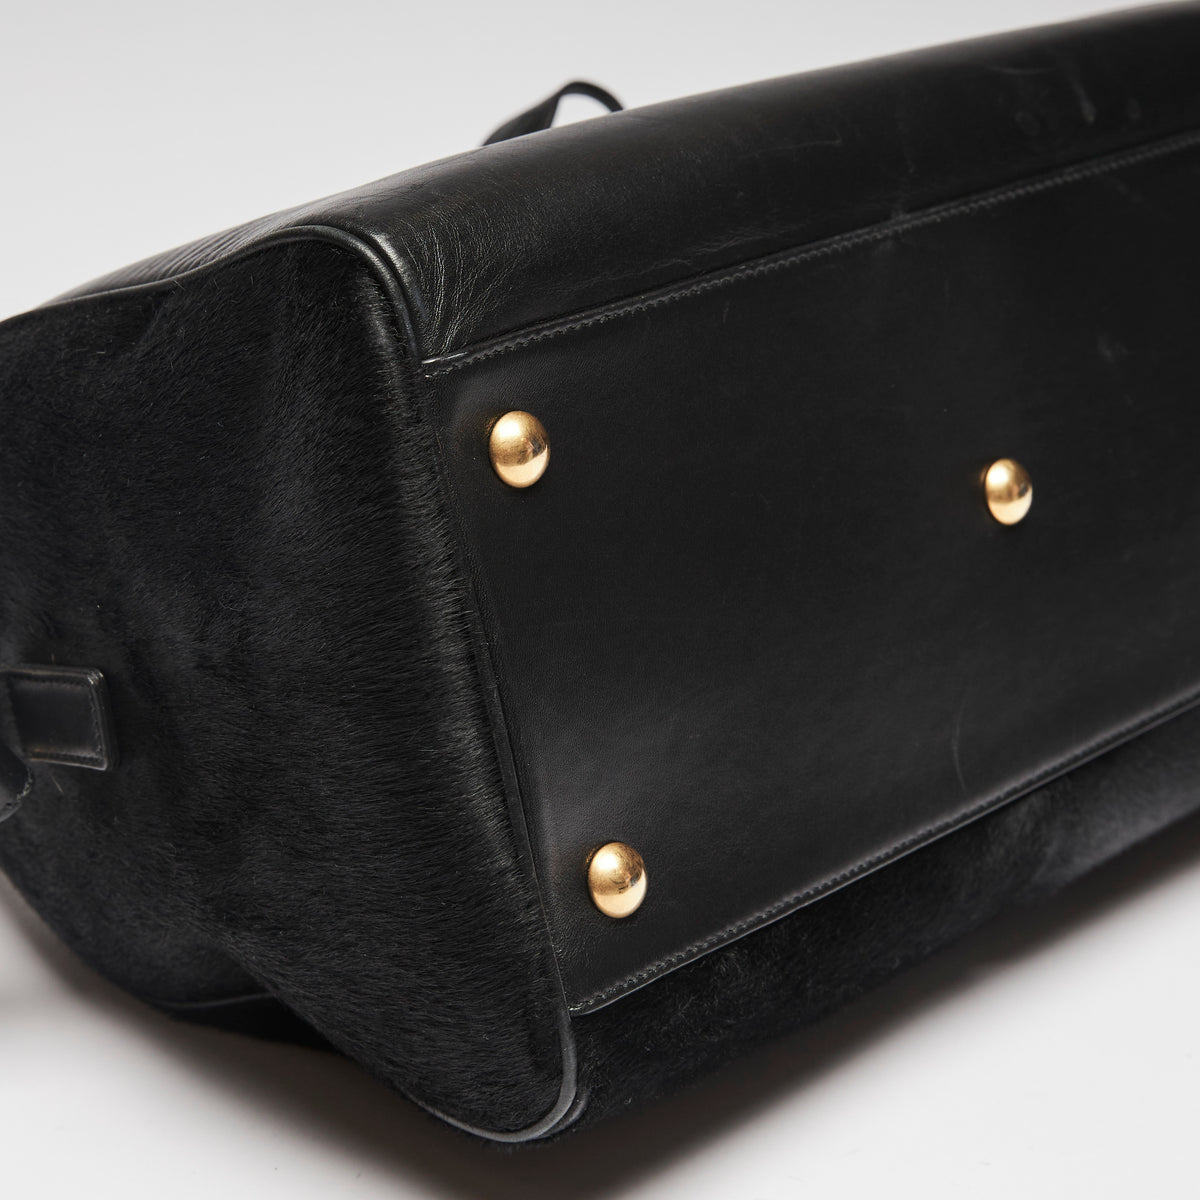 Pre-Loved Black Leather and Pony Hair Duffle Bag with Removable Shoulder Strap. (corner)